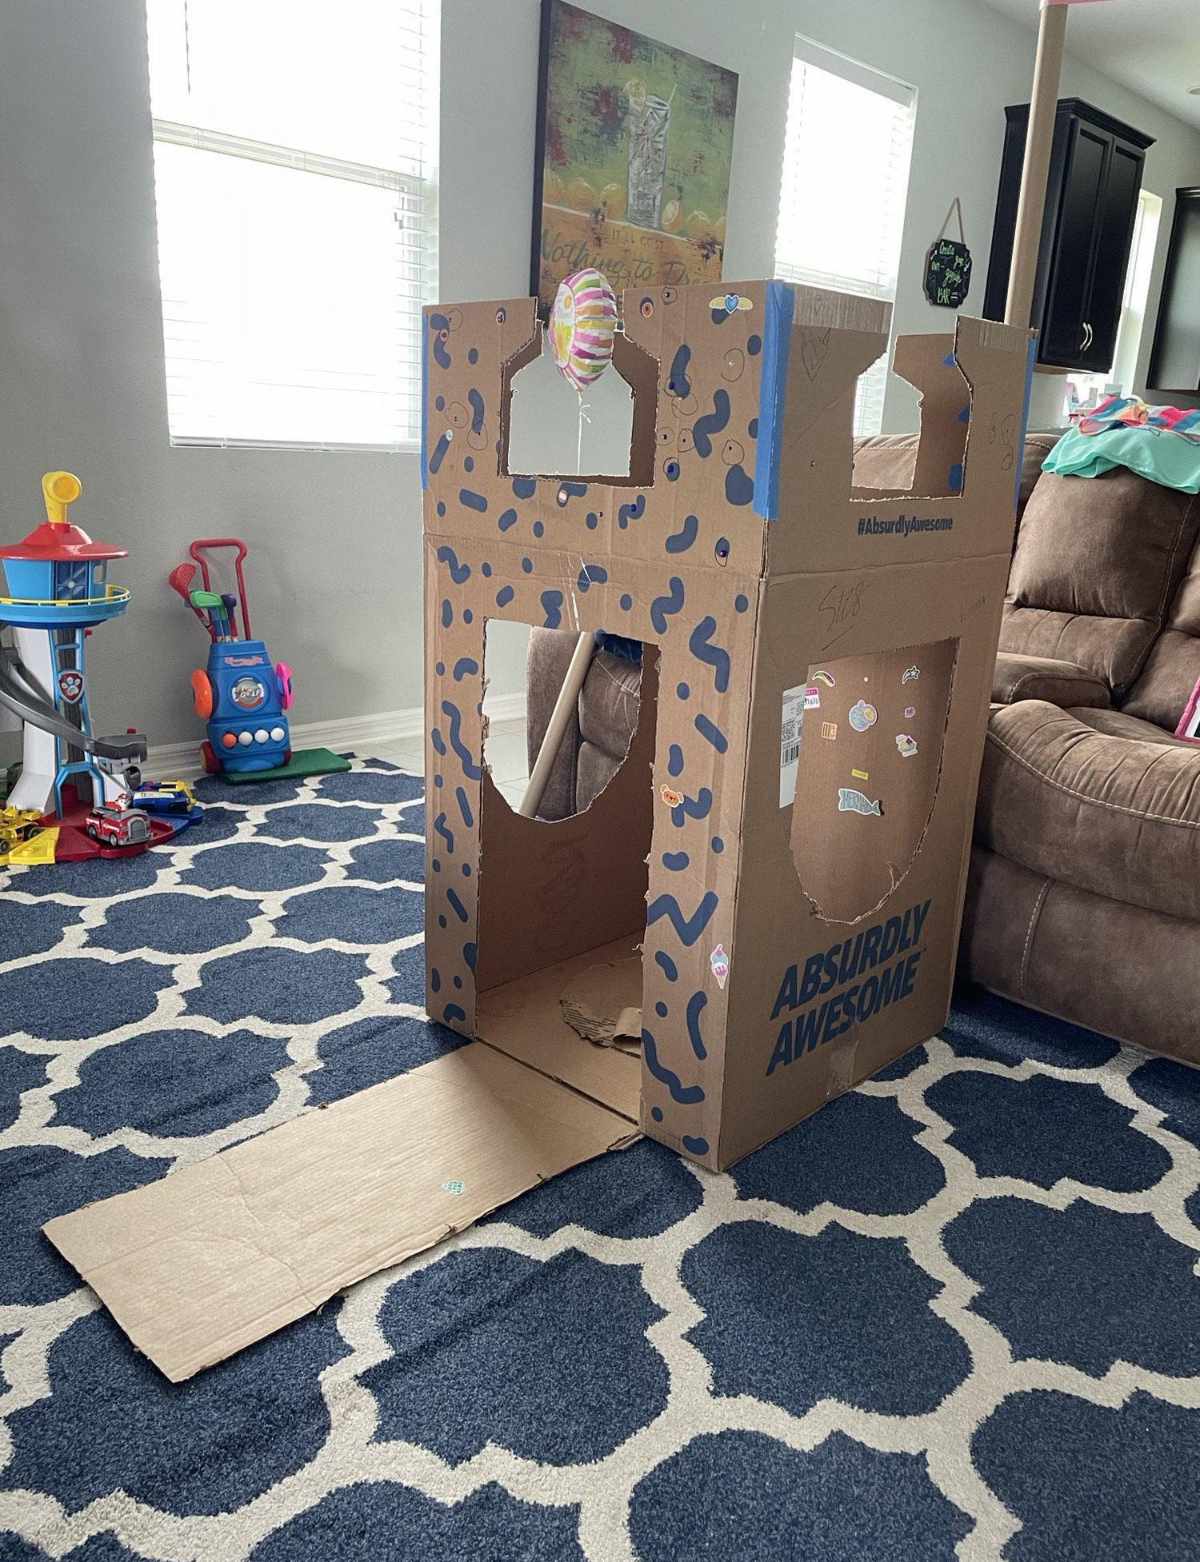 The pool float my wife bought me came in a box with instructions on how to turn it into a castle